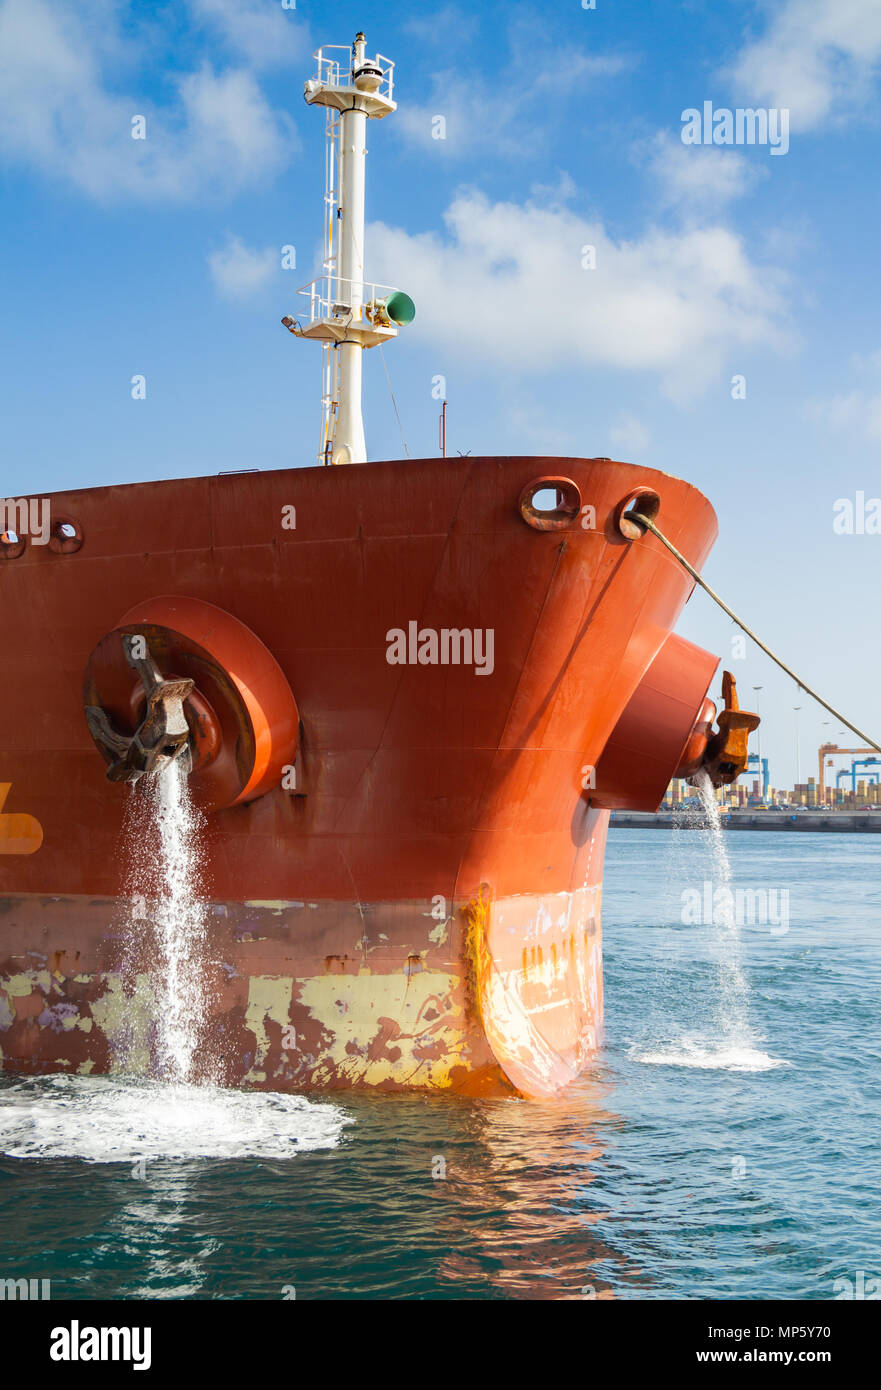 Oil tanker pumping ballast water as tug boat guides ship onto berth in port Stock Photo